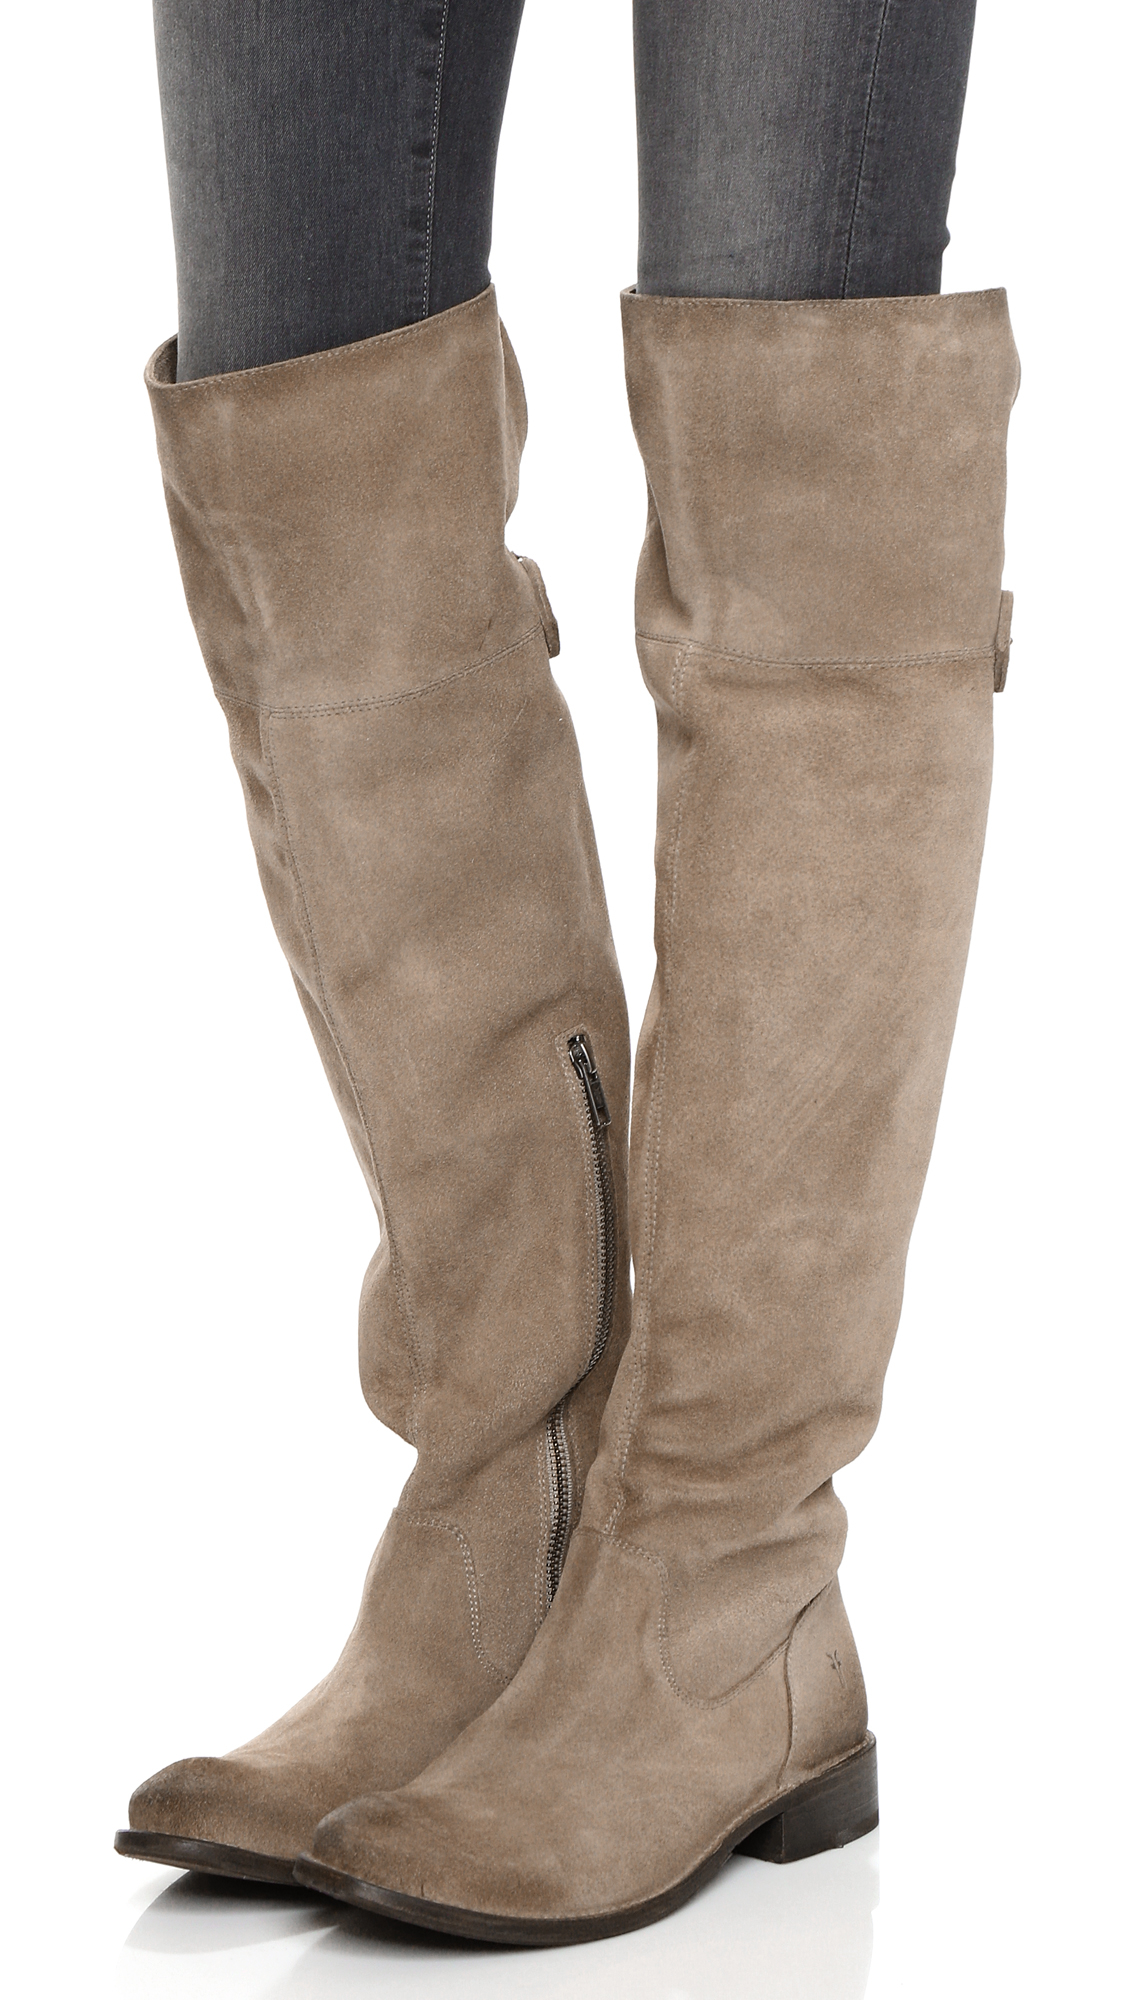 Frye Shirley Suede Over The Knee Boots in Ash (Brown) - Lyst